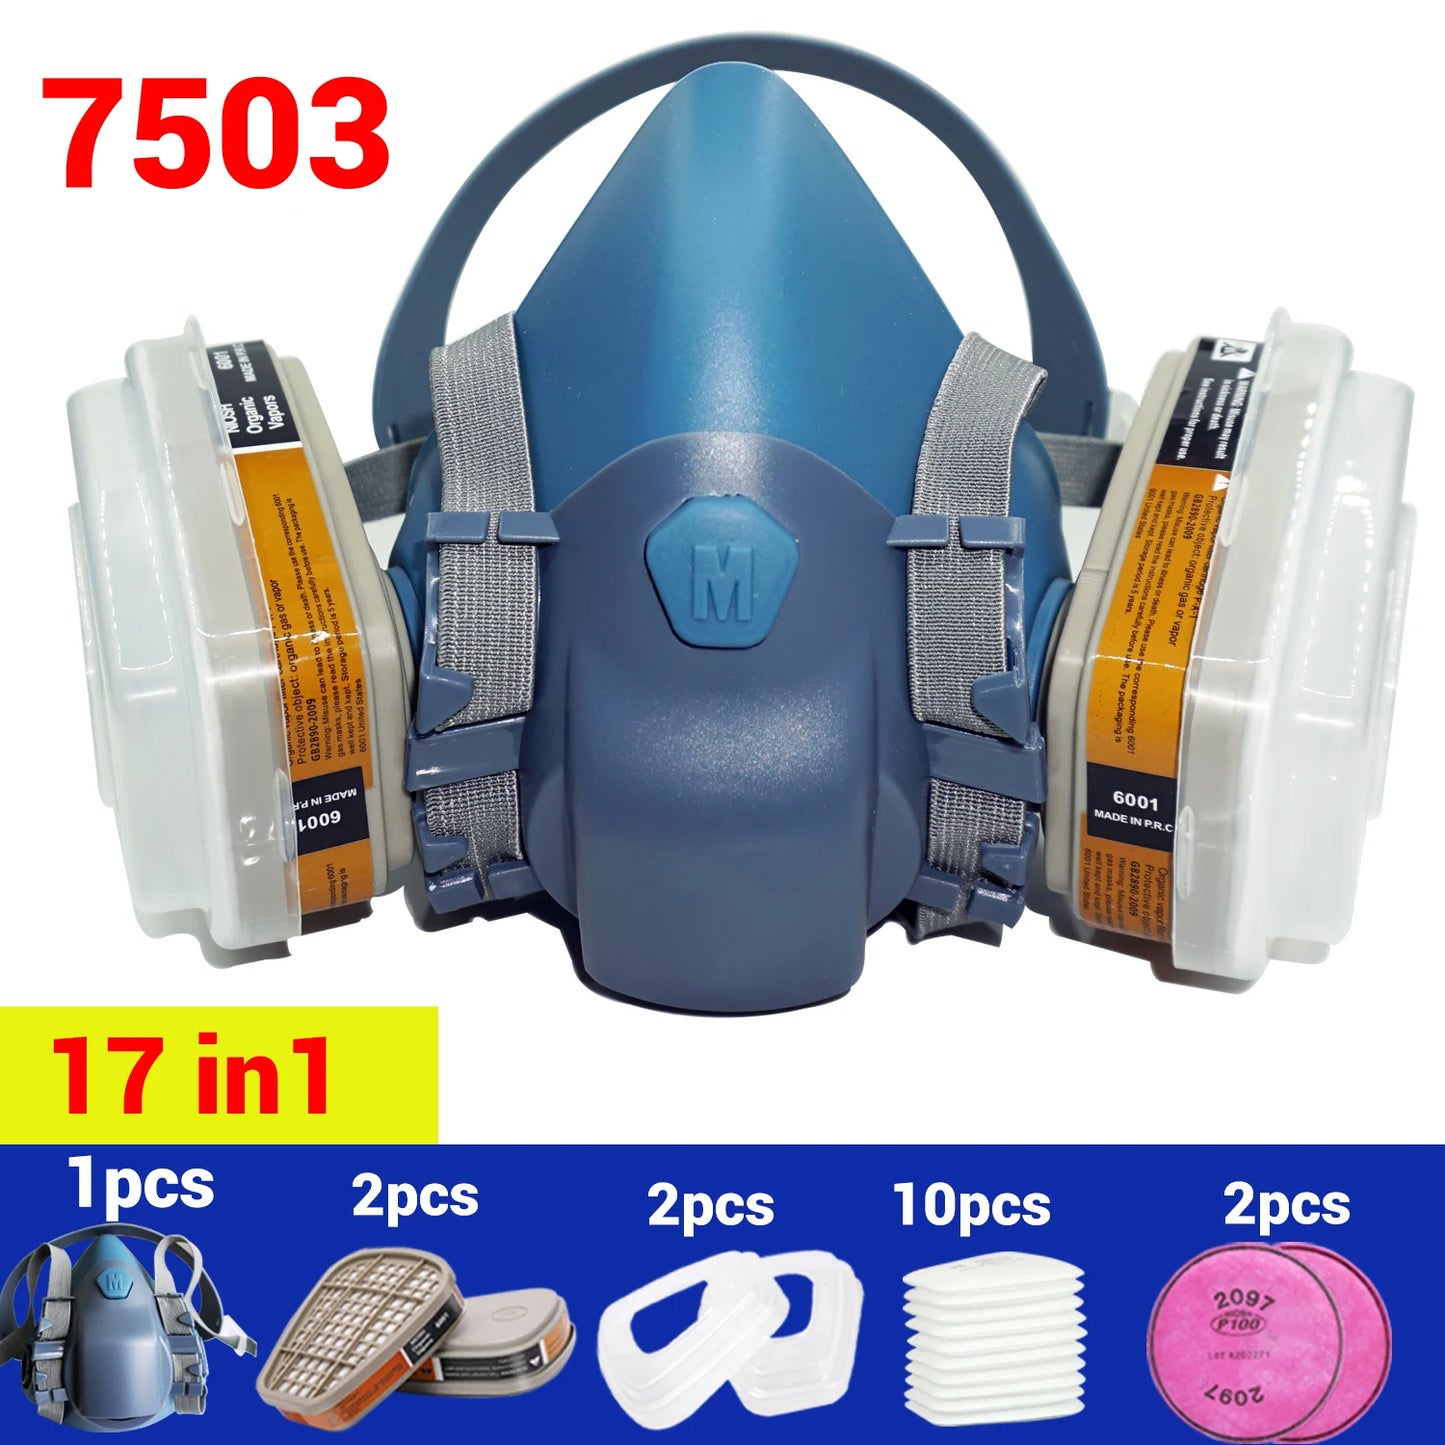 7503 Respirator Mask Protective Mask Industry Painting Spray Dust Gas Mask With 3M 501 5N11 6001CN Chemcial Half face Mask